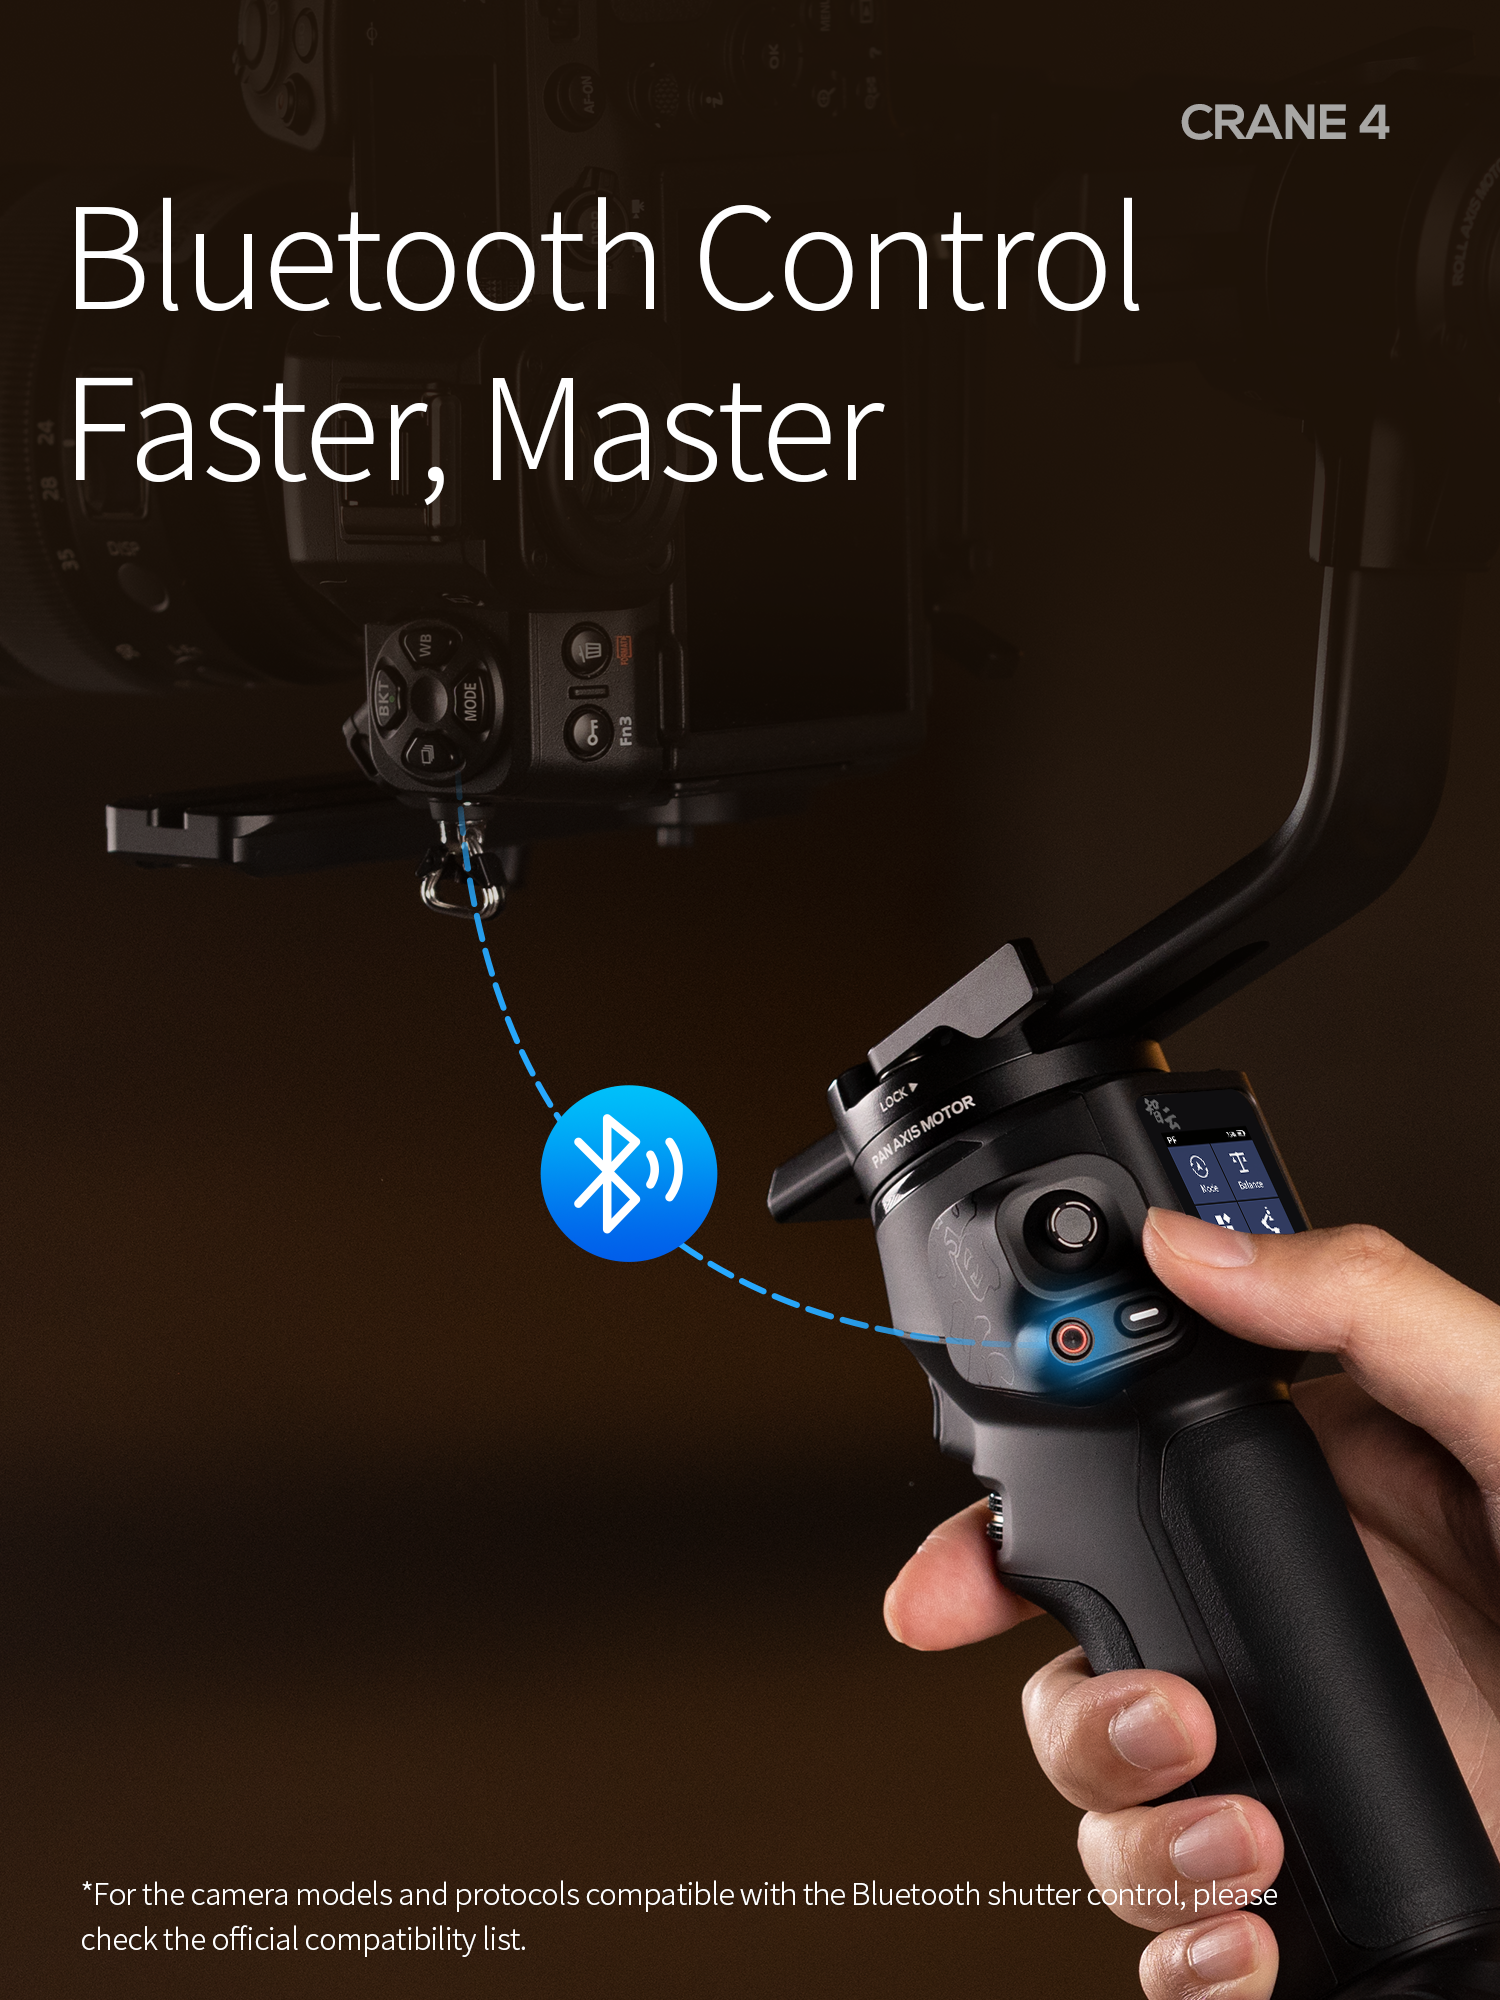 Bluetooth Control. Faster, Master